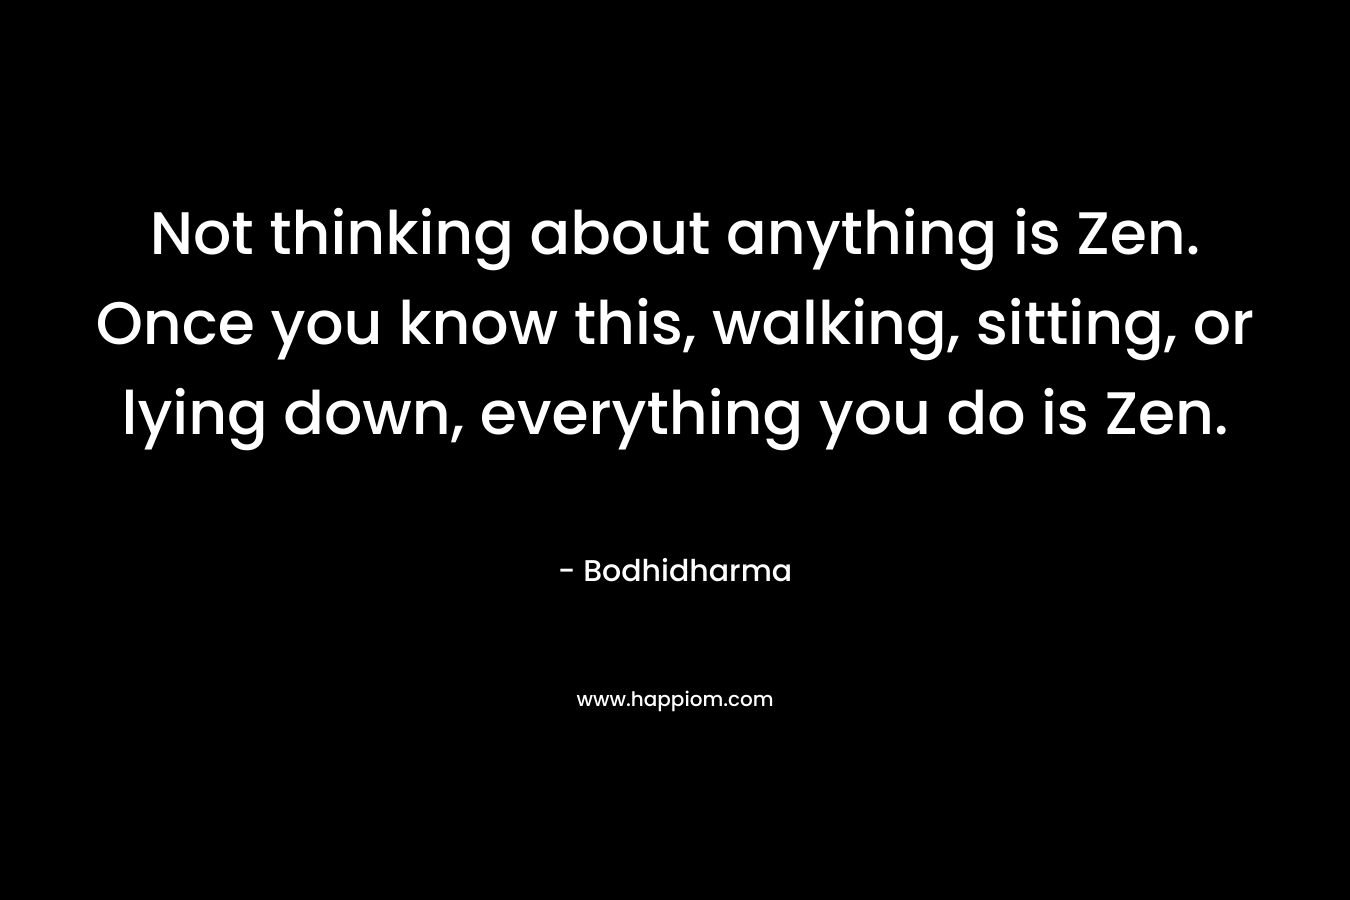 Not thinking about anything is Zen. Once you know this, walking, sitting, or lying down, everything you do is Zen.